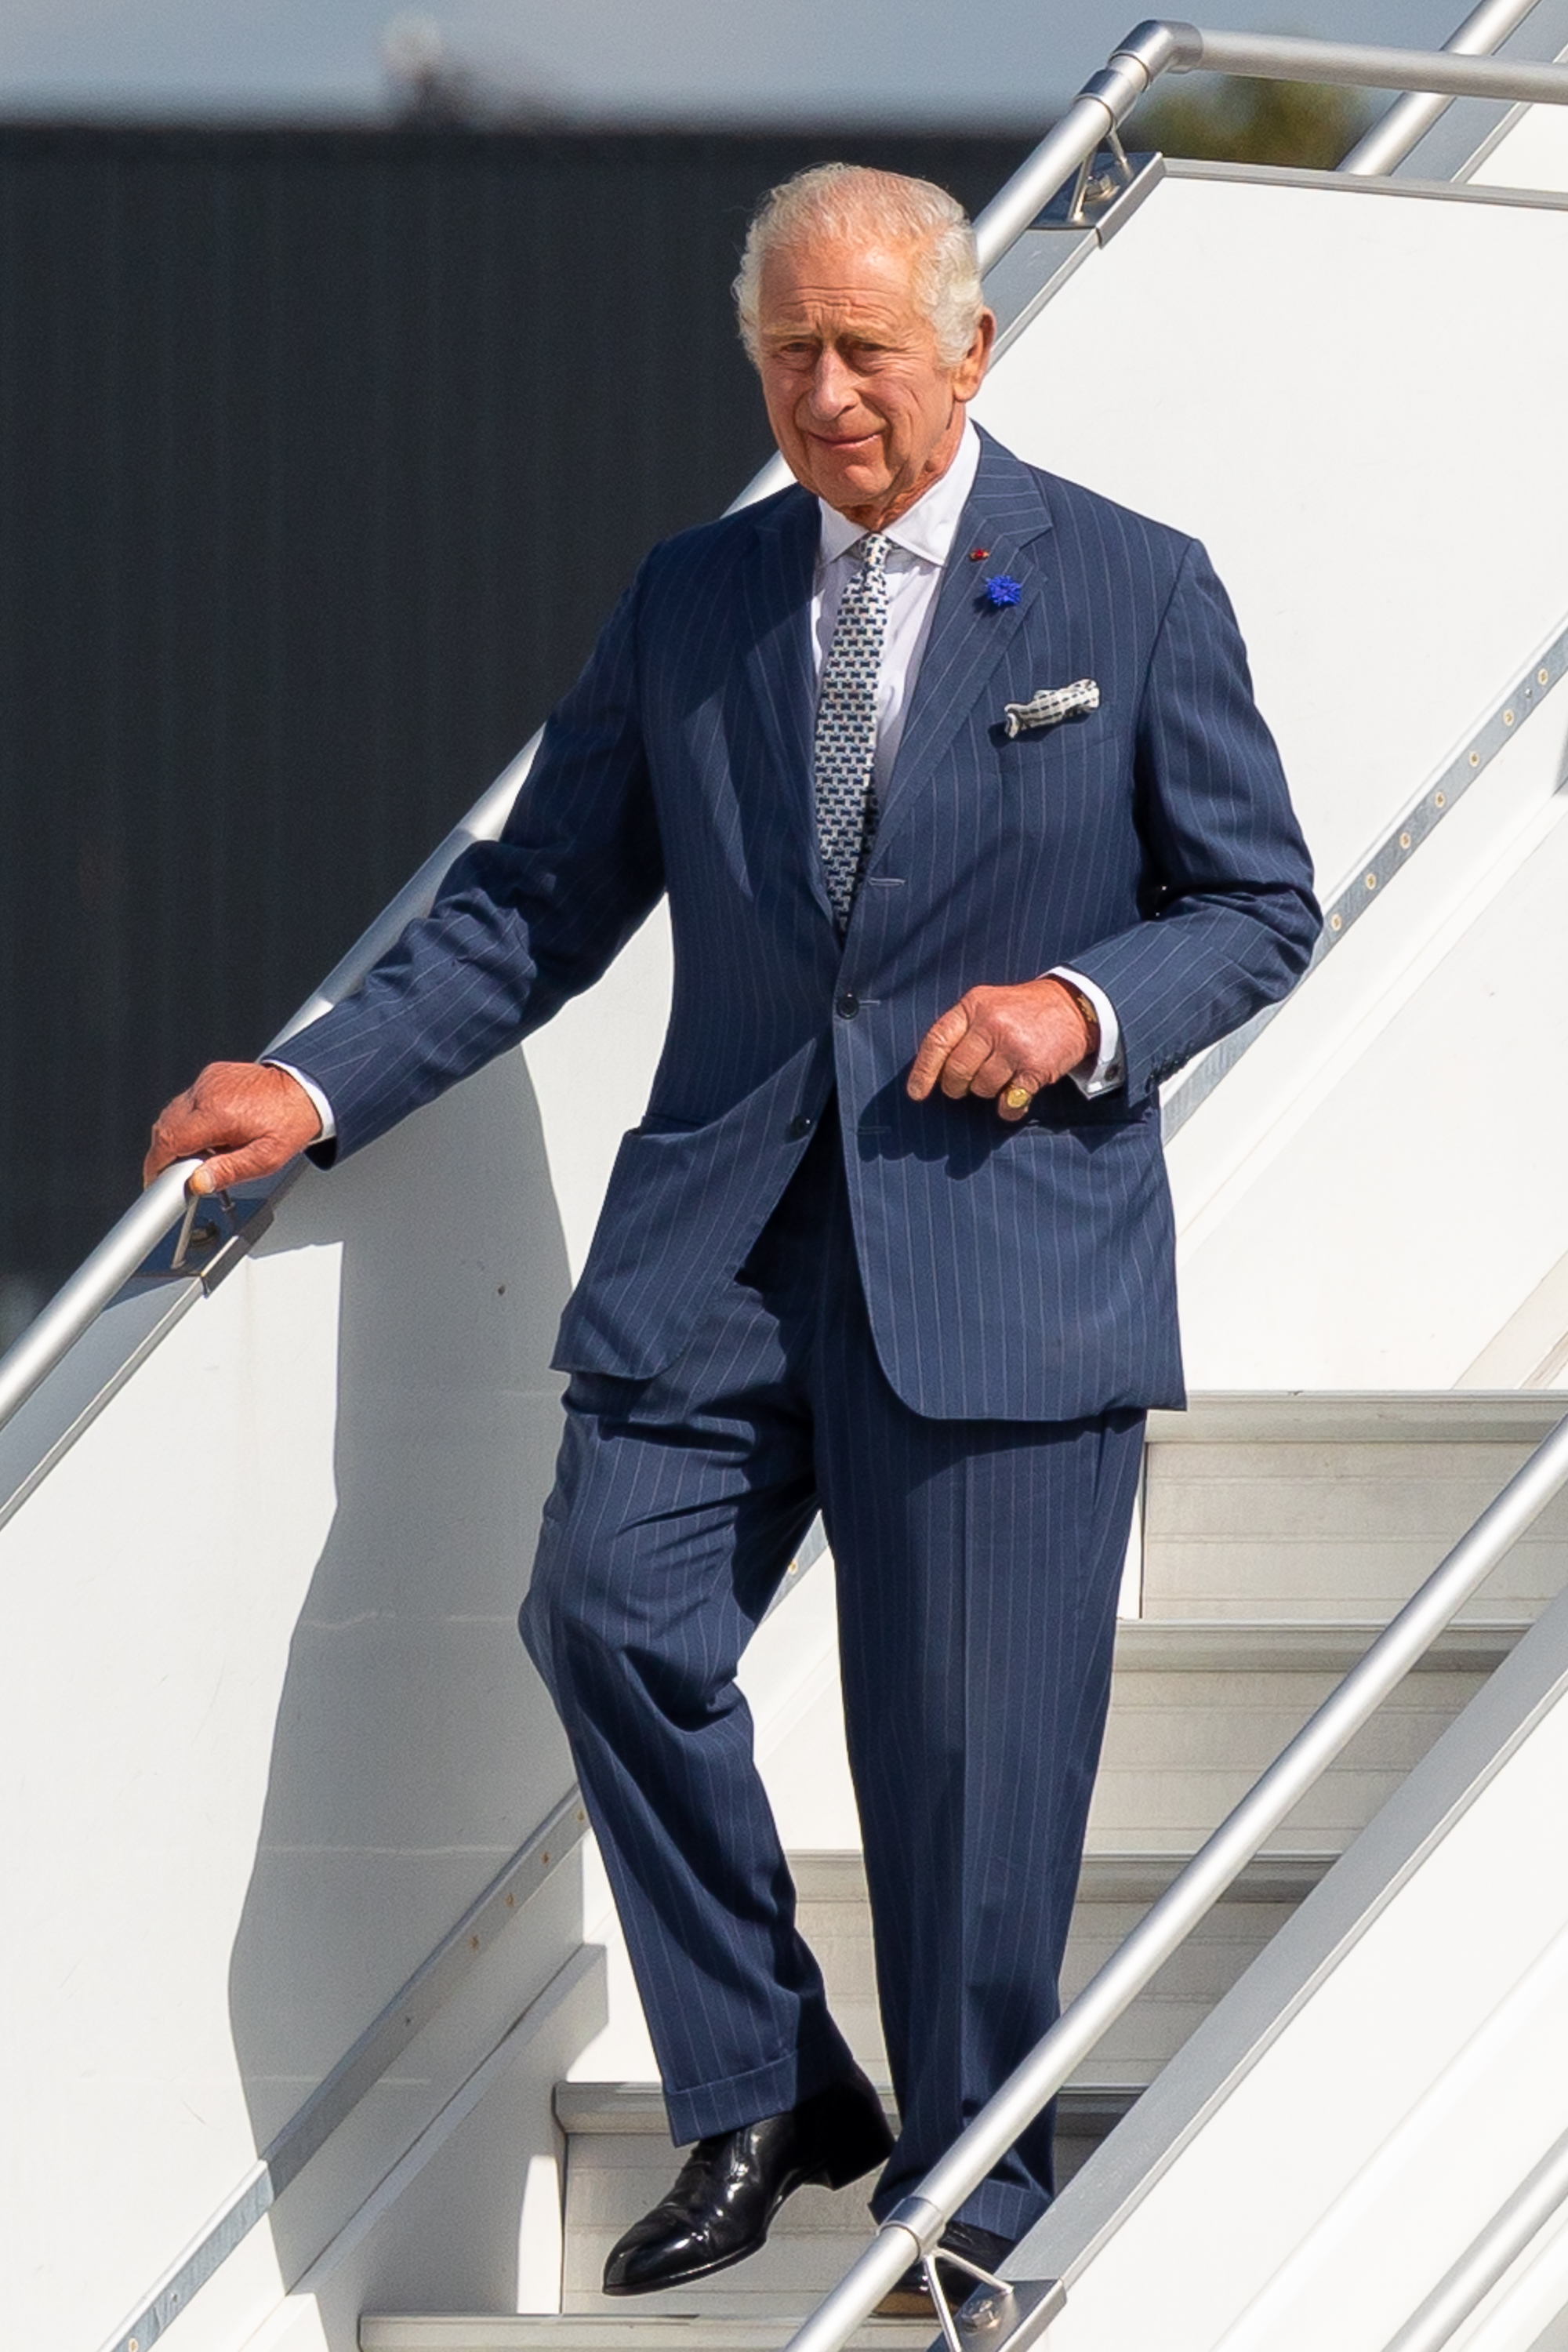 King Charles III getting off a plane as he arrives for a state visit to France in Paris, France on September 20, 2023 | Source: Getty Images